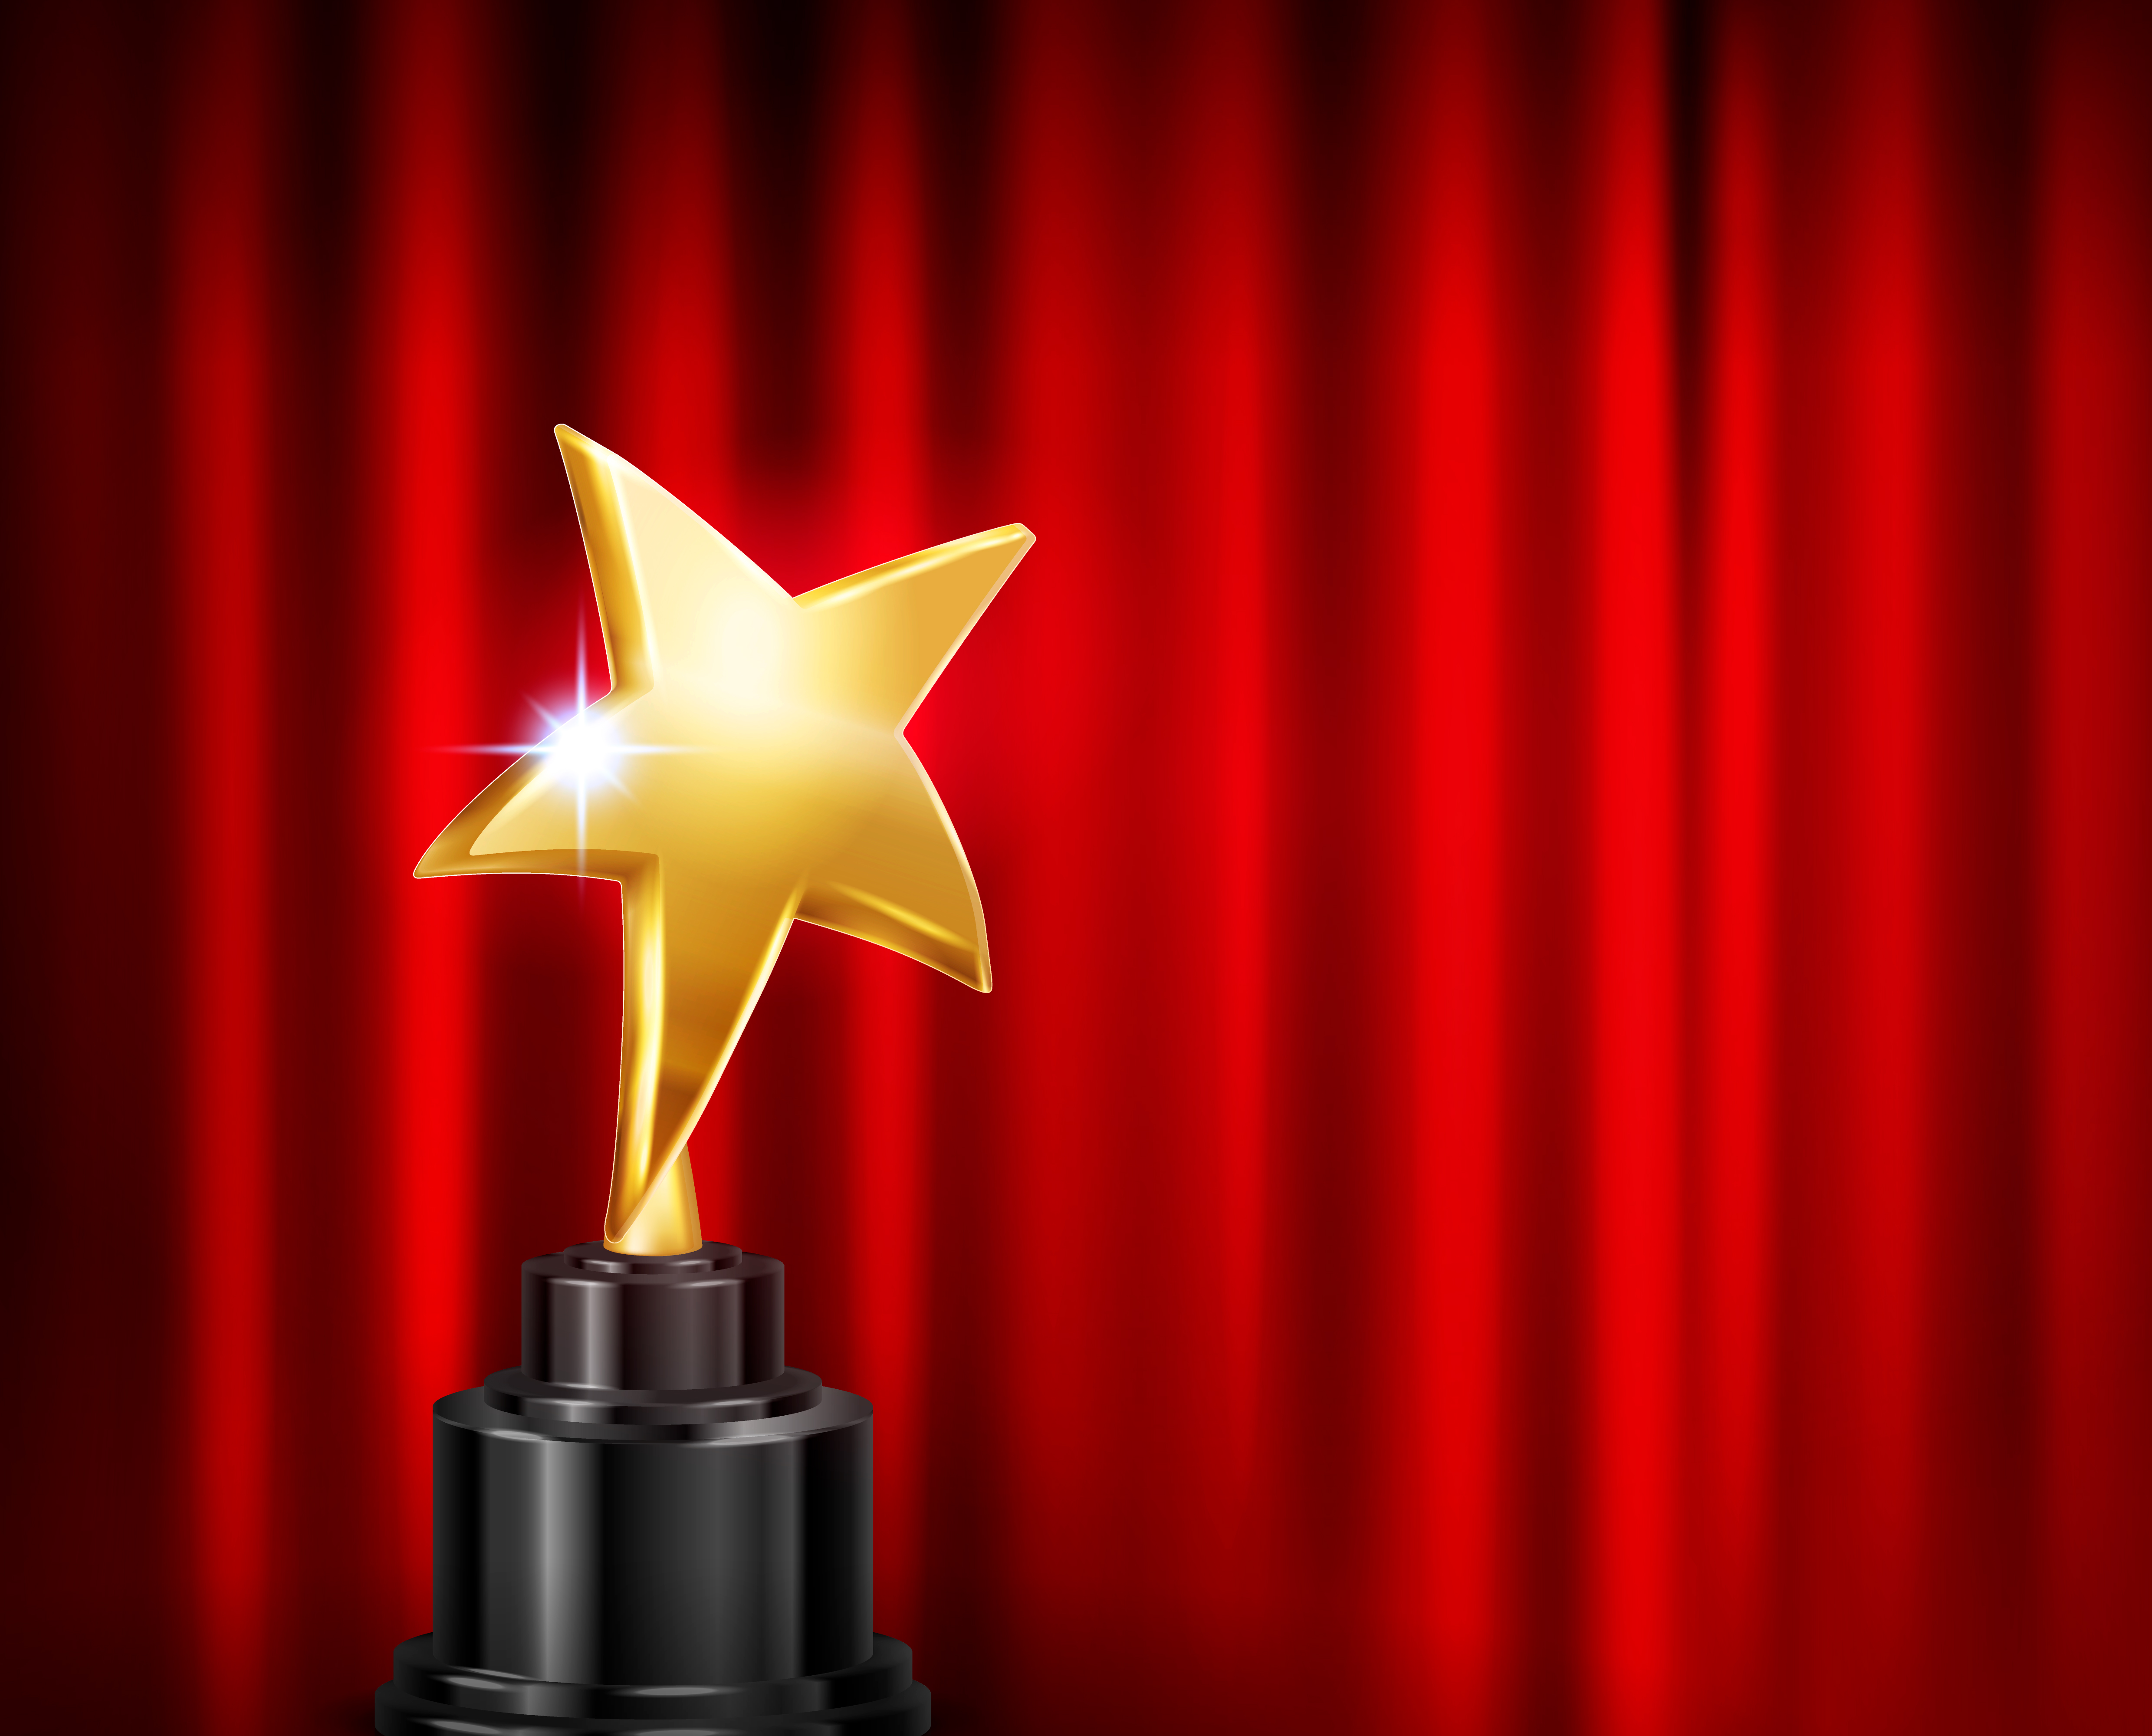 A golden star on a black pedestal, framed by a red curtain, symbolizing achievements.